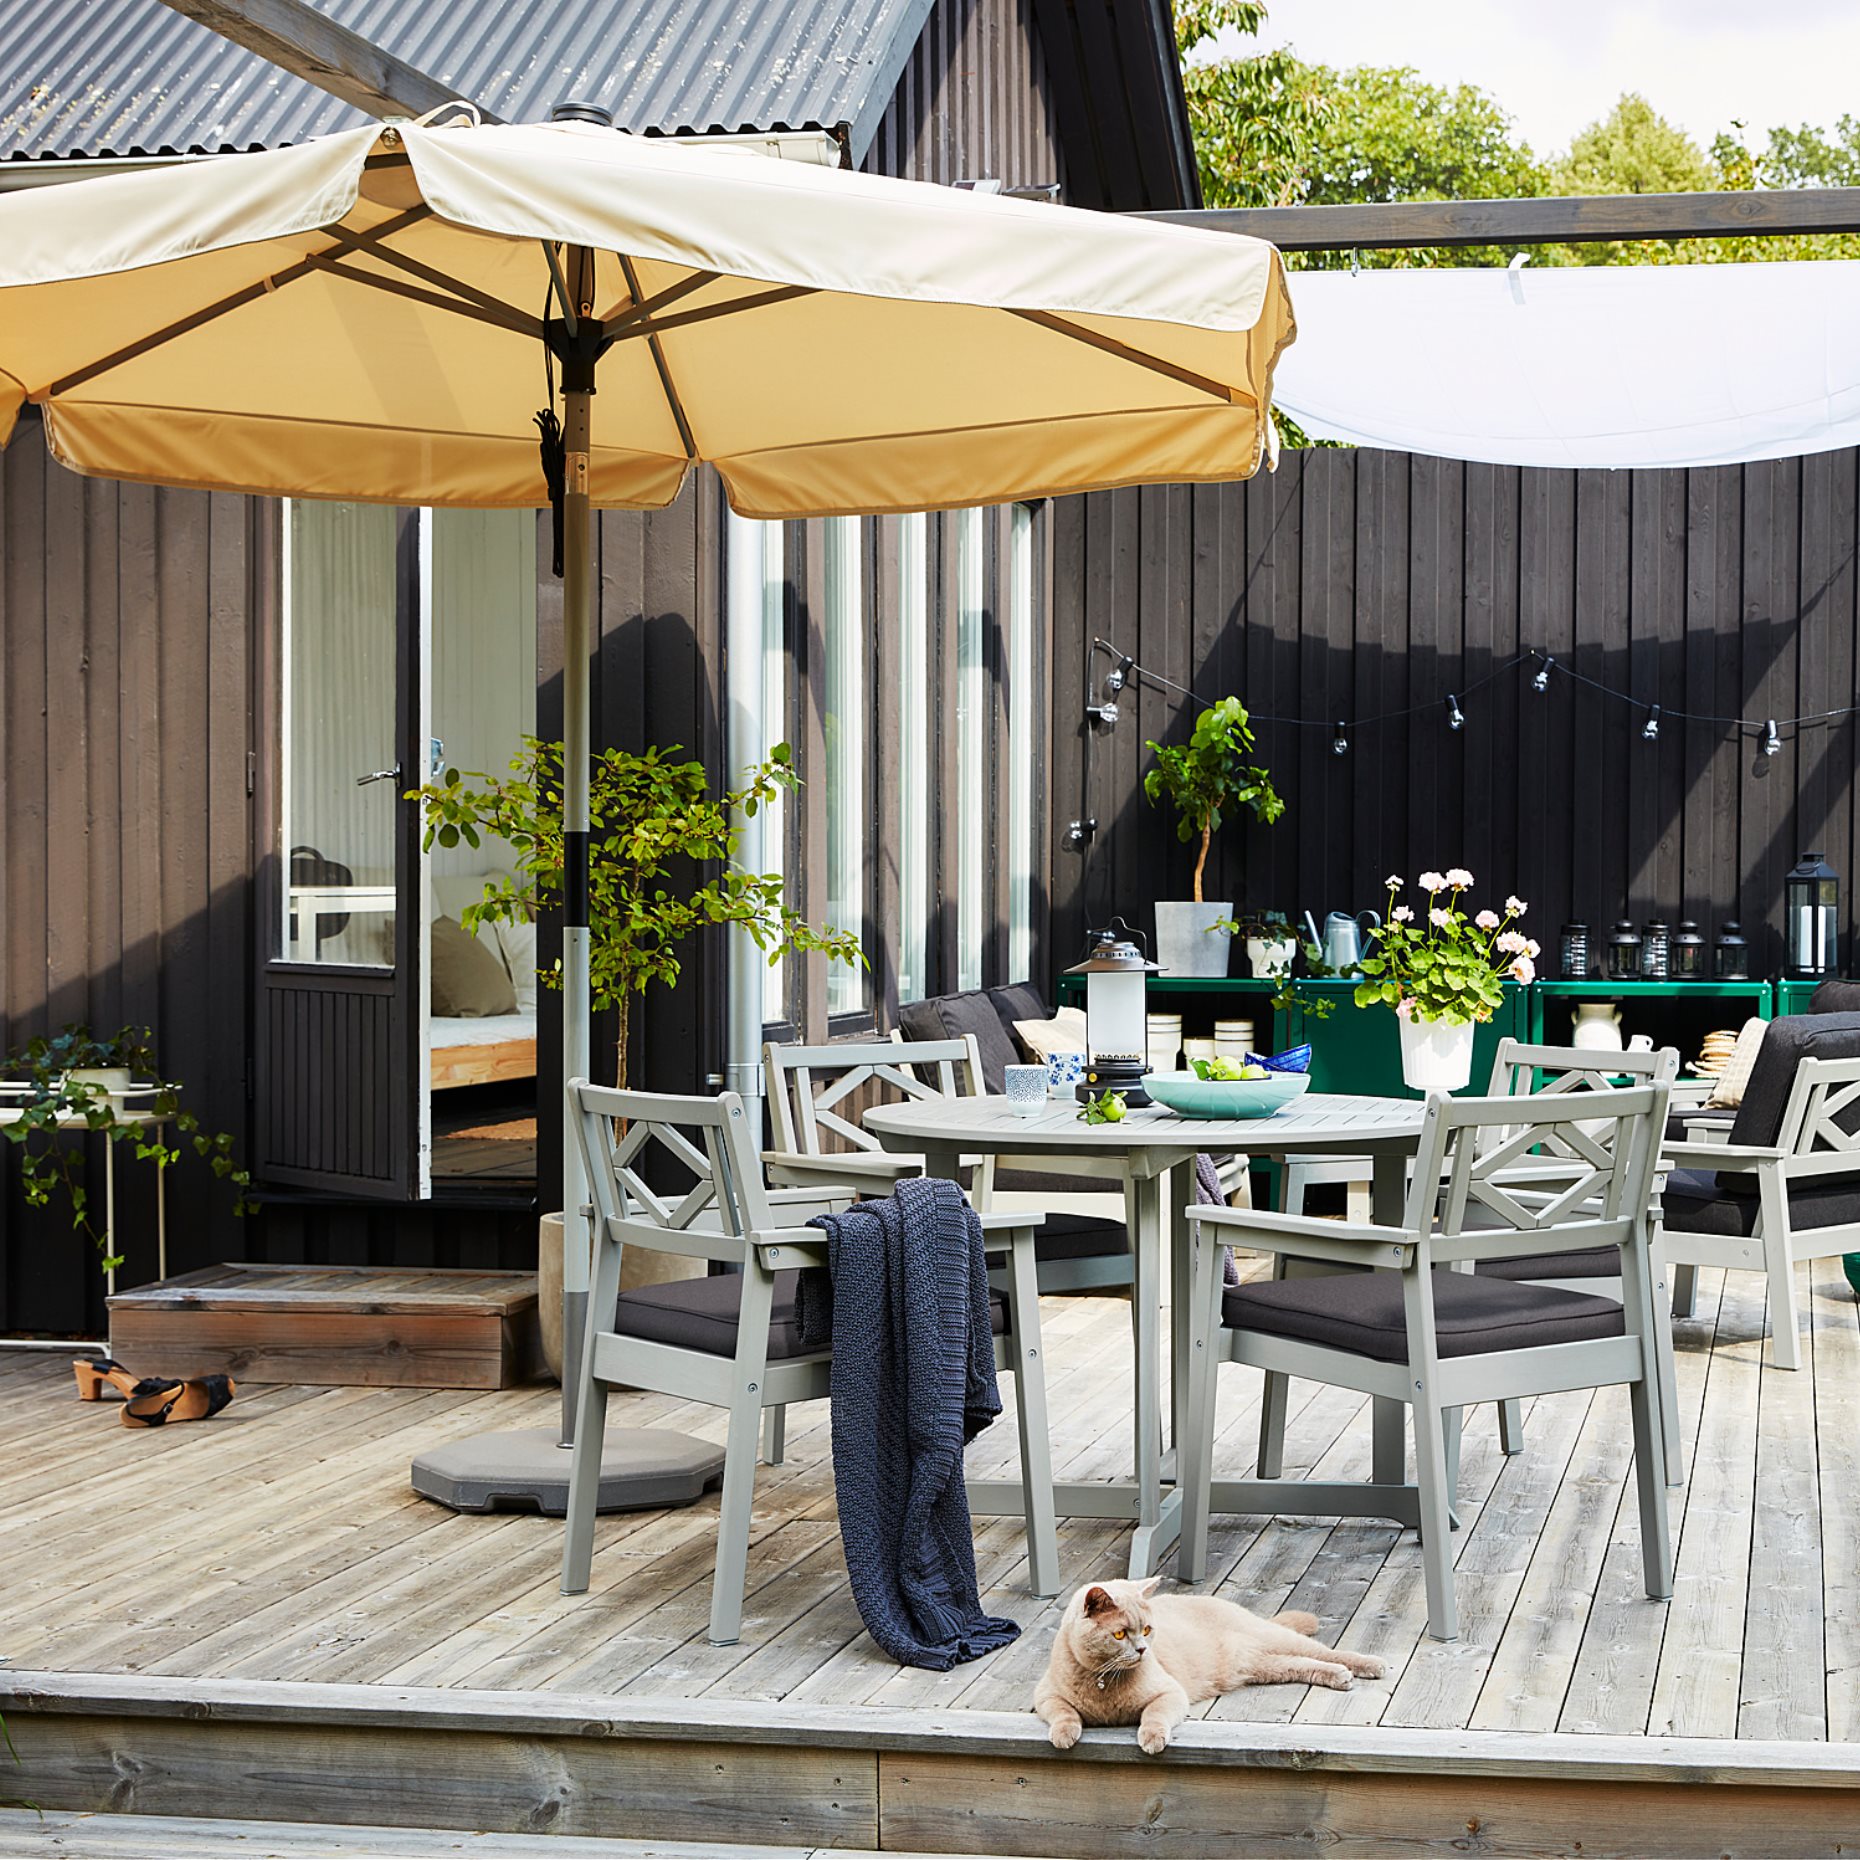 BONDHOLMEN, table+4 chairs with armrests, outdoor, 293.304.82